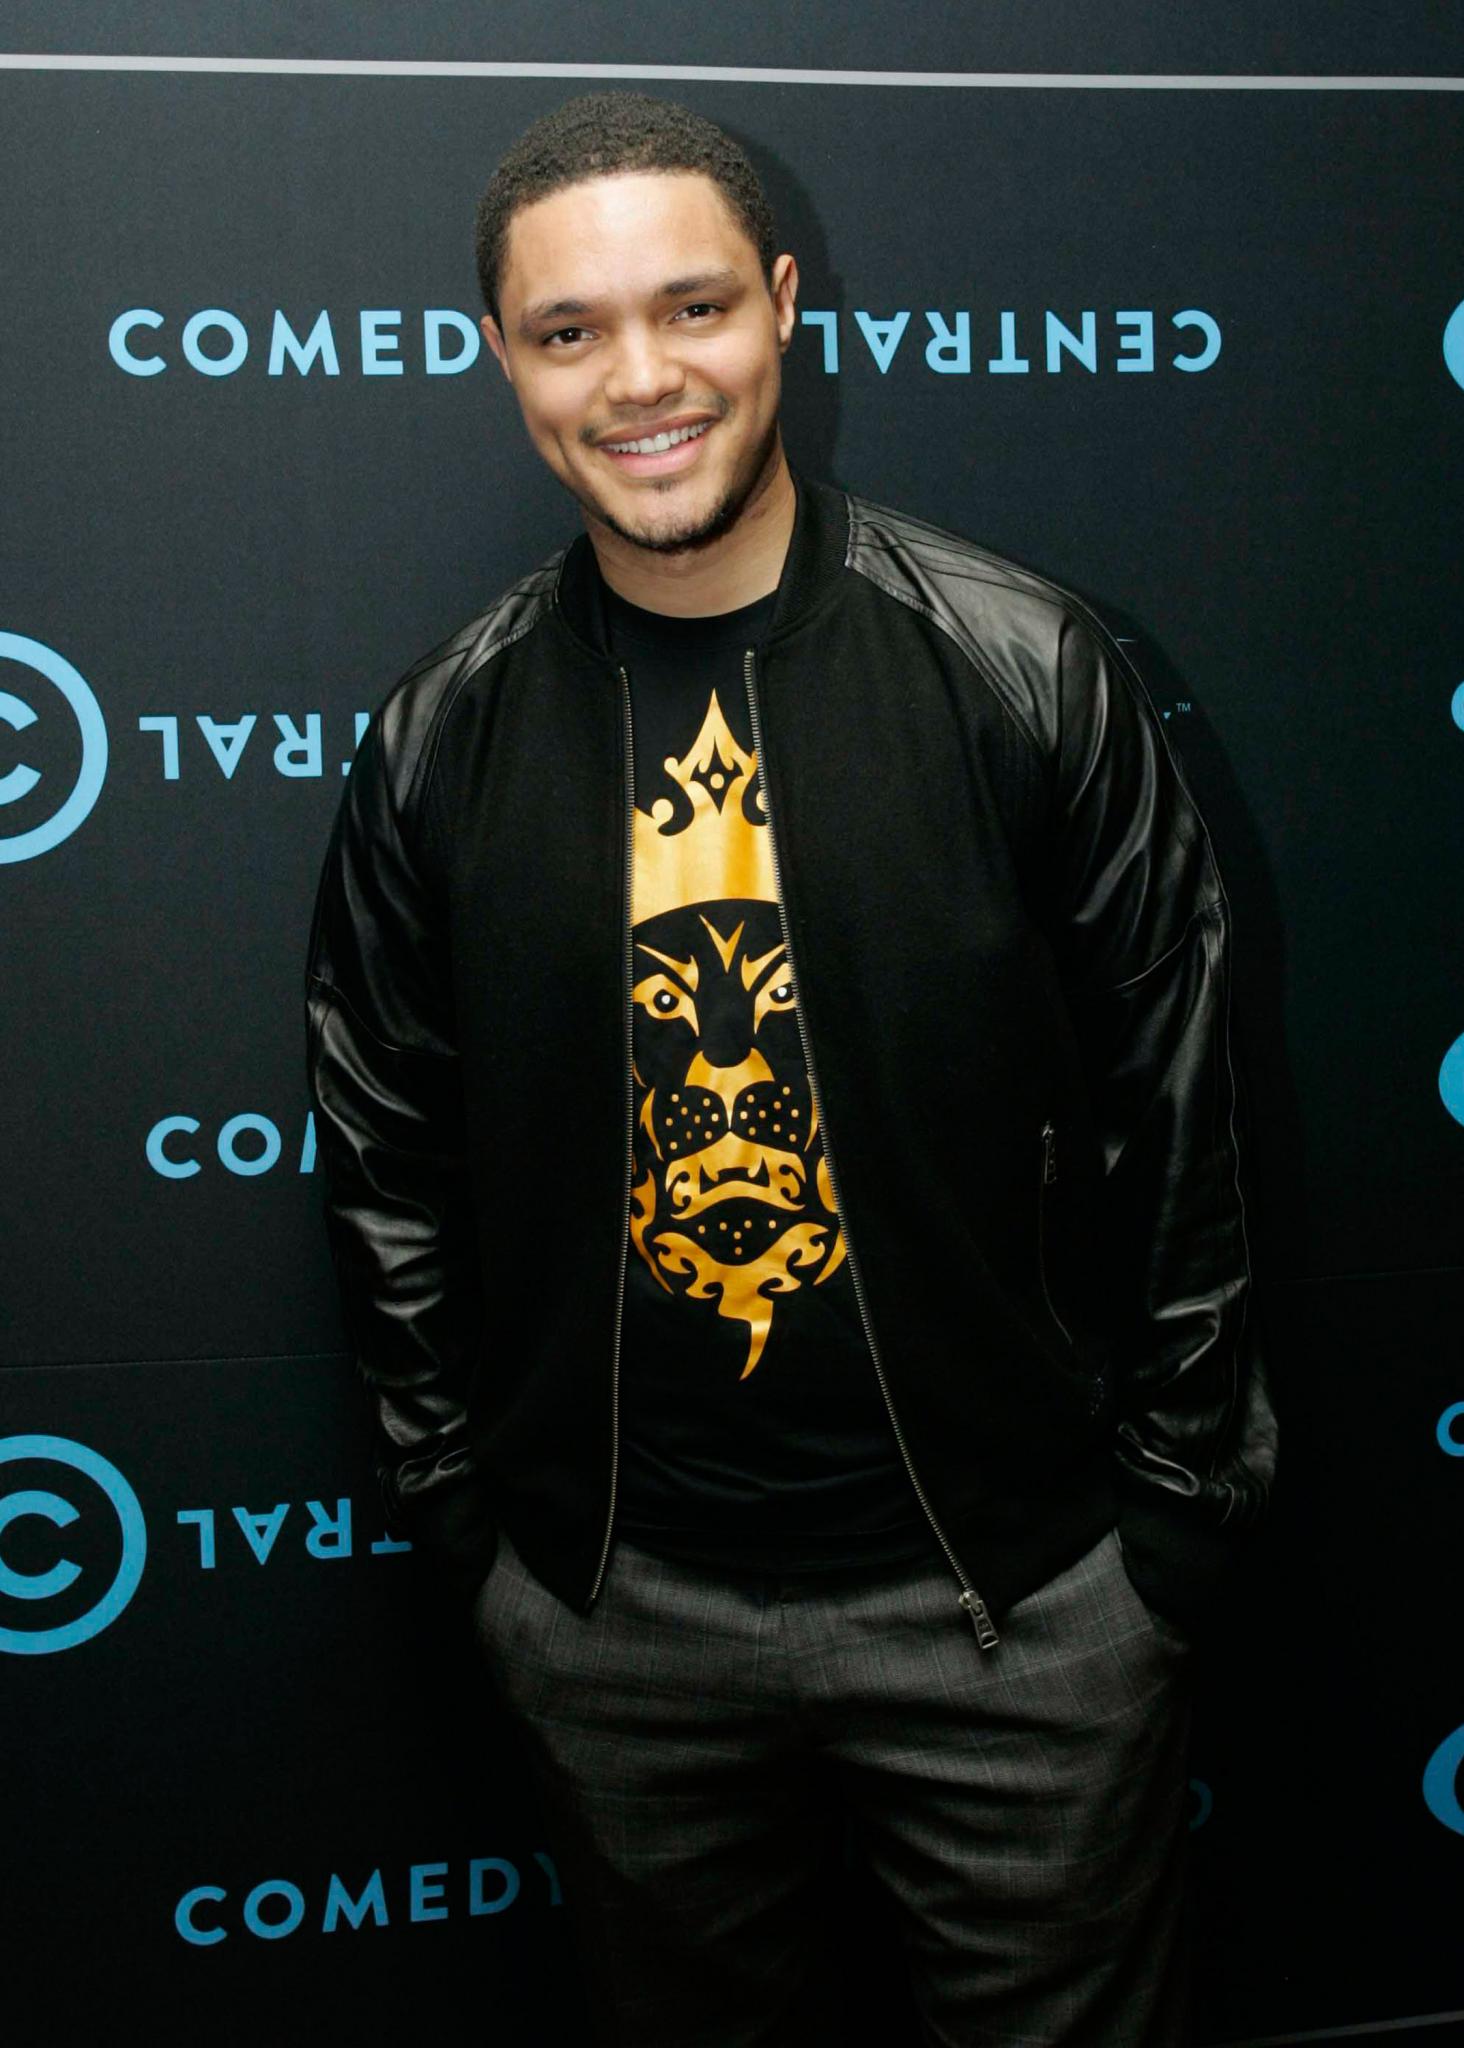 7 Things to Know About Trevor Noah, the New Host of 'The Daily Show’